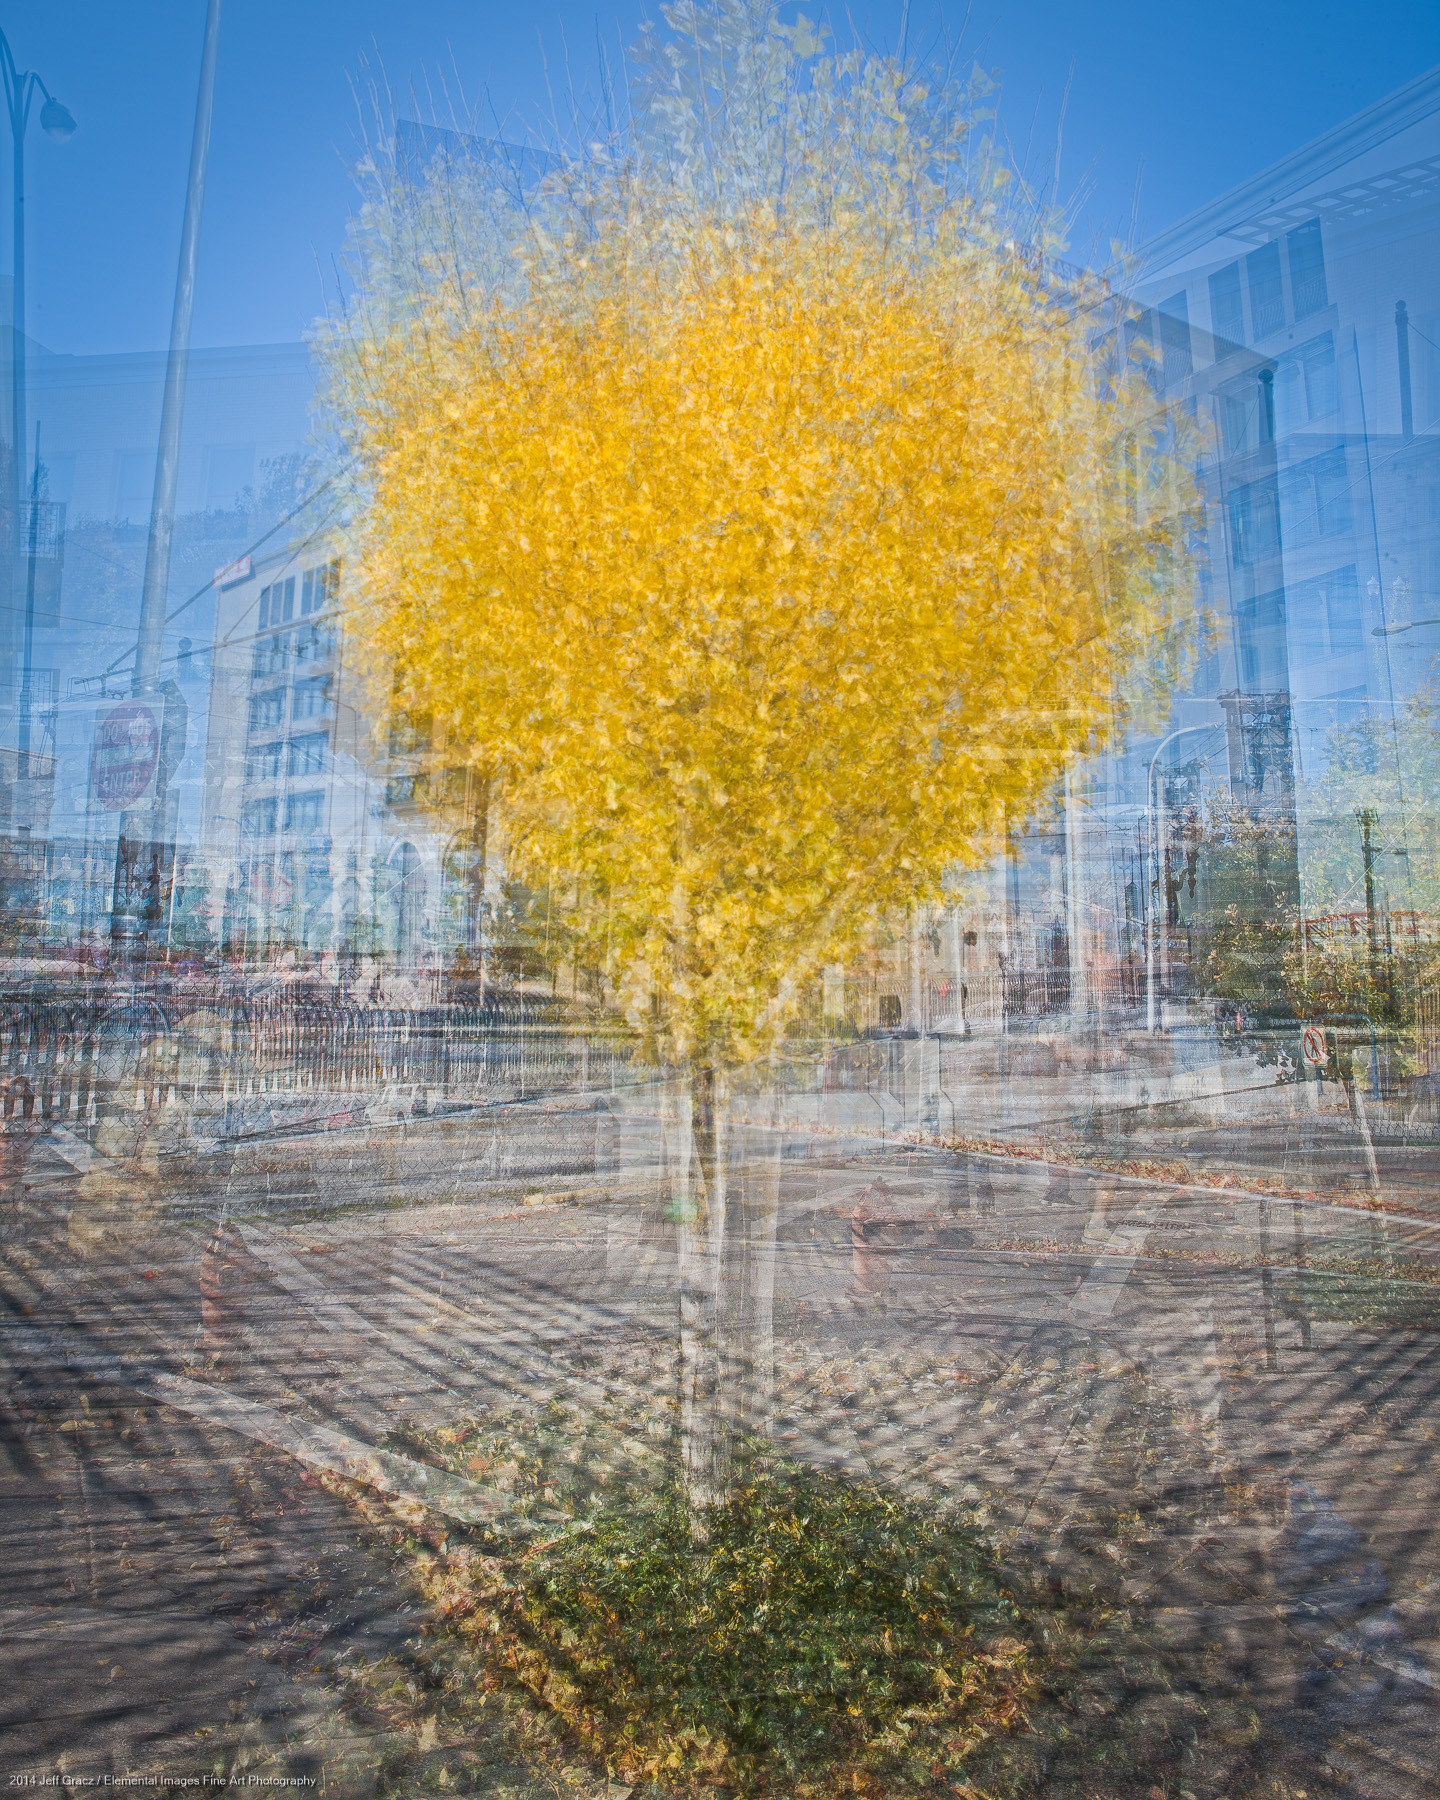 Arborhoods Series: Street Gingko | Portland | OR | USA - © 2014 Jeff Gracz / Elemental Images Fine Art Photography - All Rights Reserved Worldwide